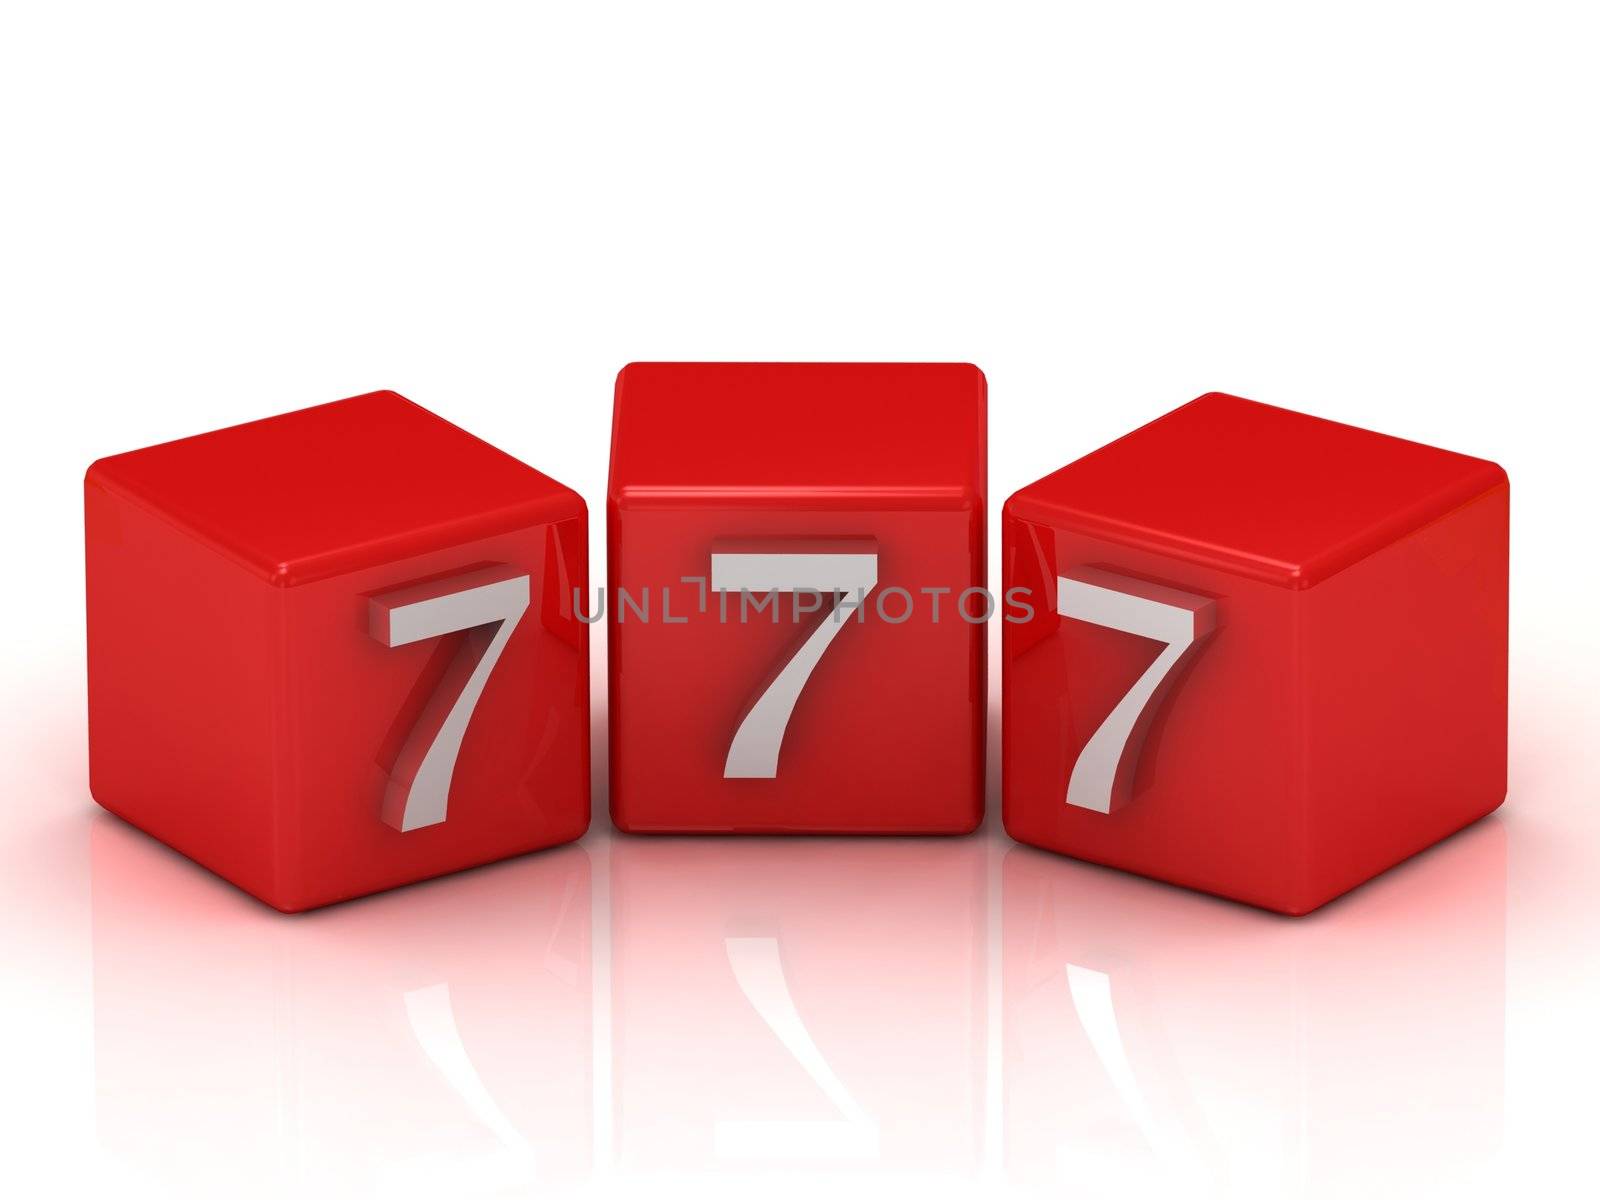 777 number on the red cubes isolated on white background